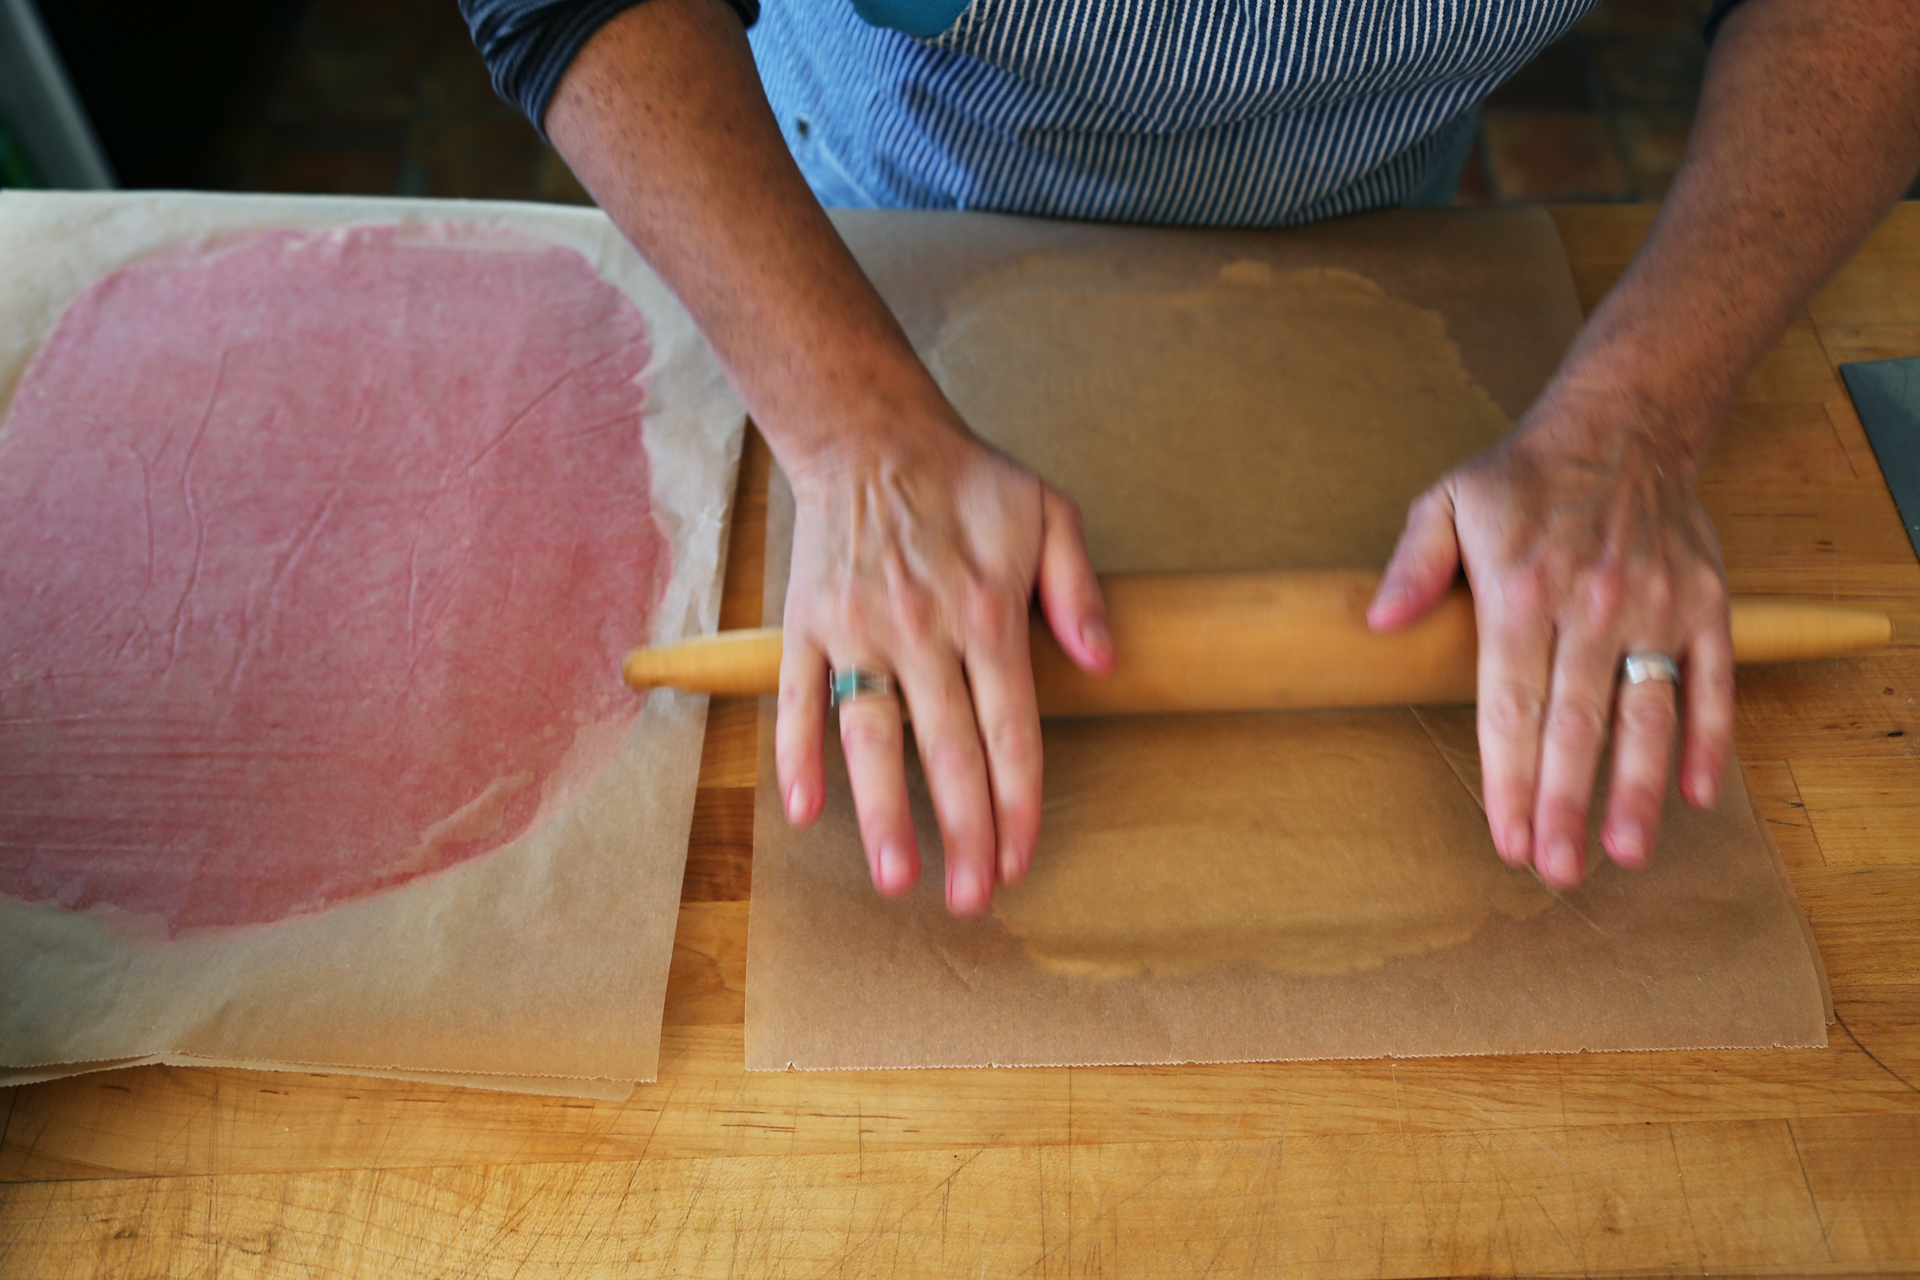 Top each with a second piece of parchment, then roll out each into a 10-by-12-inch rectangle.